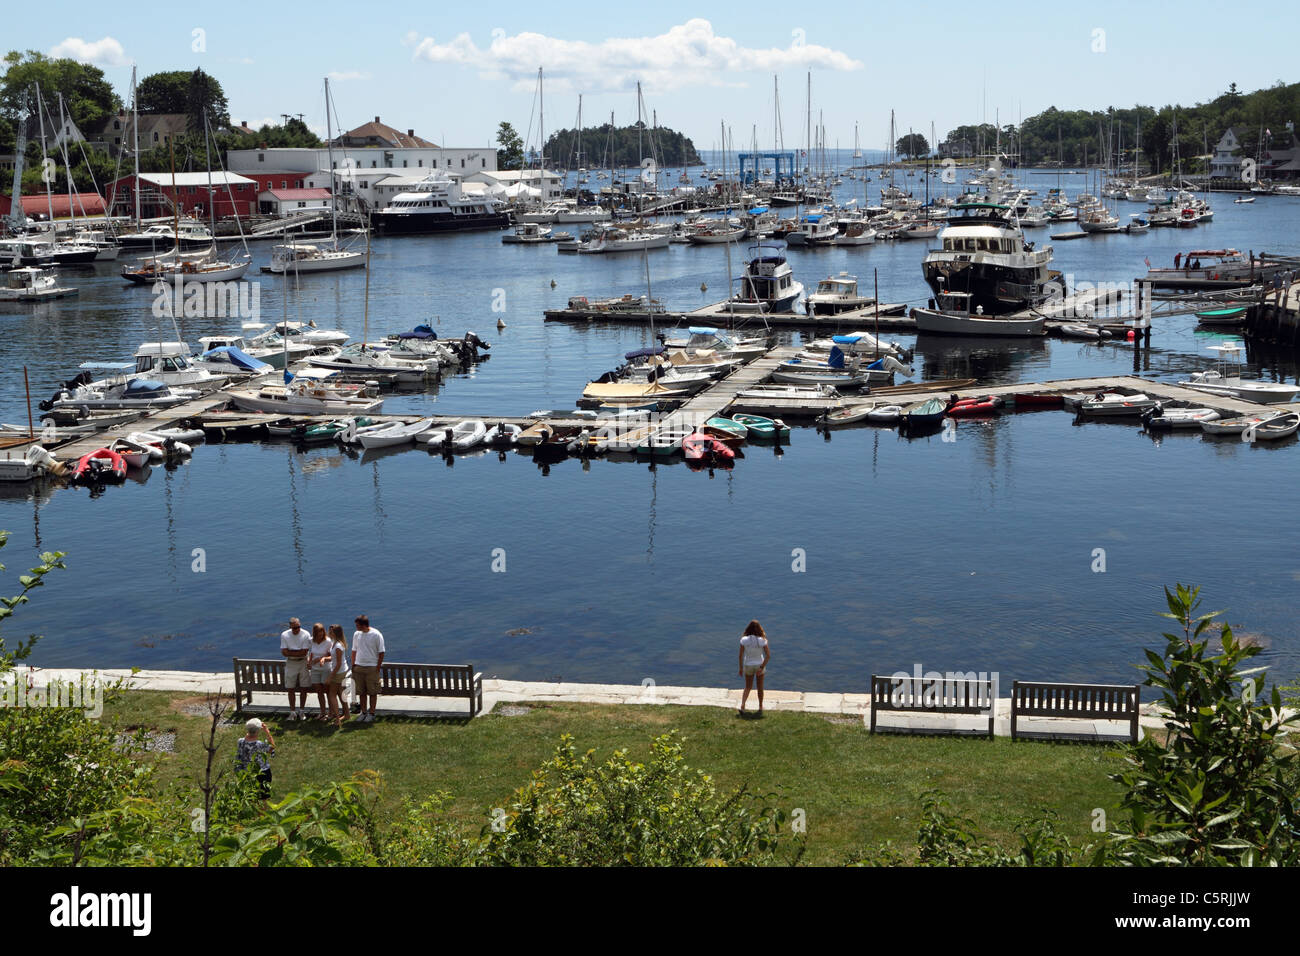 Picturesque harbor in Camden, Maine, USA. A popular Mid-Coast town in Maine. Stock Photo